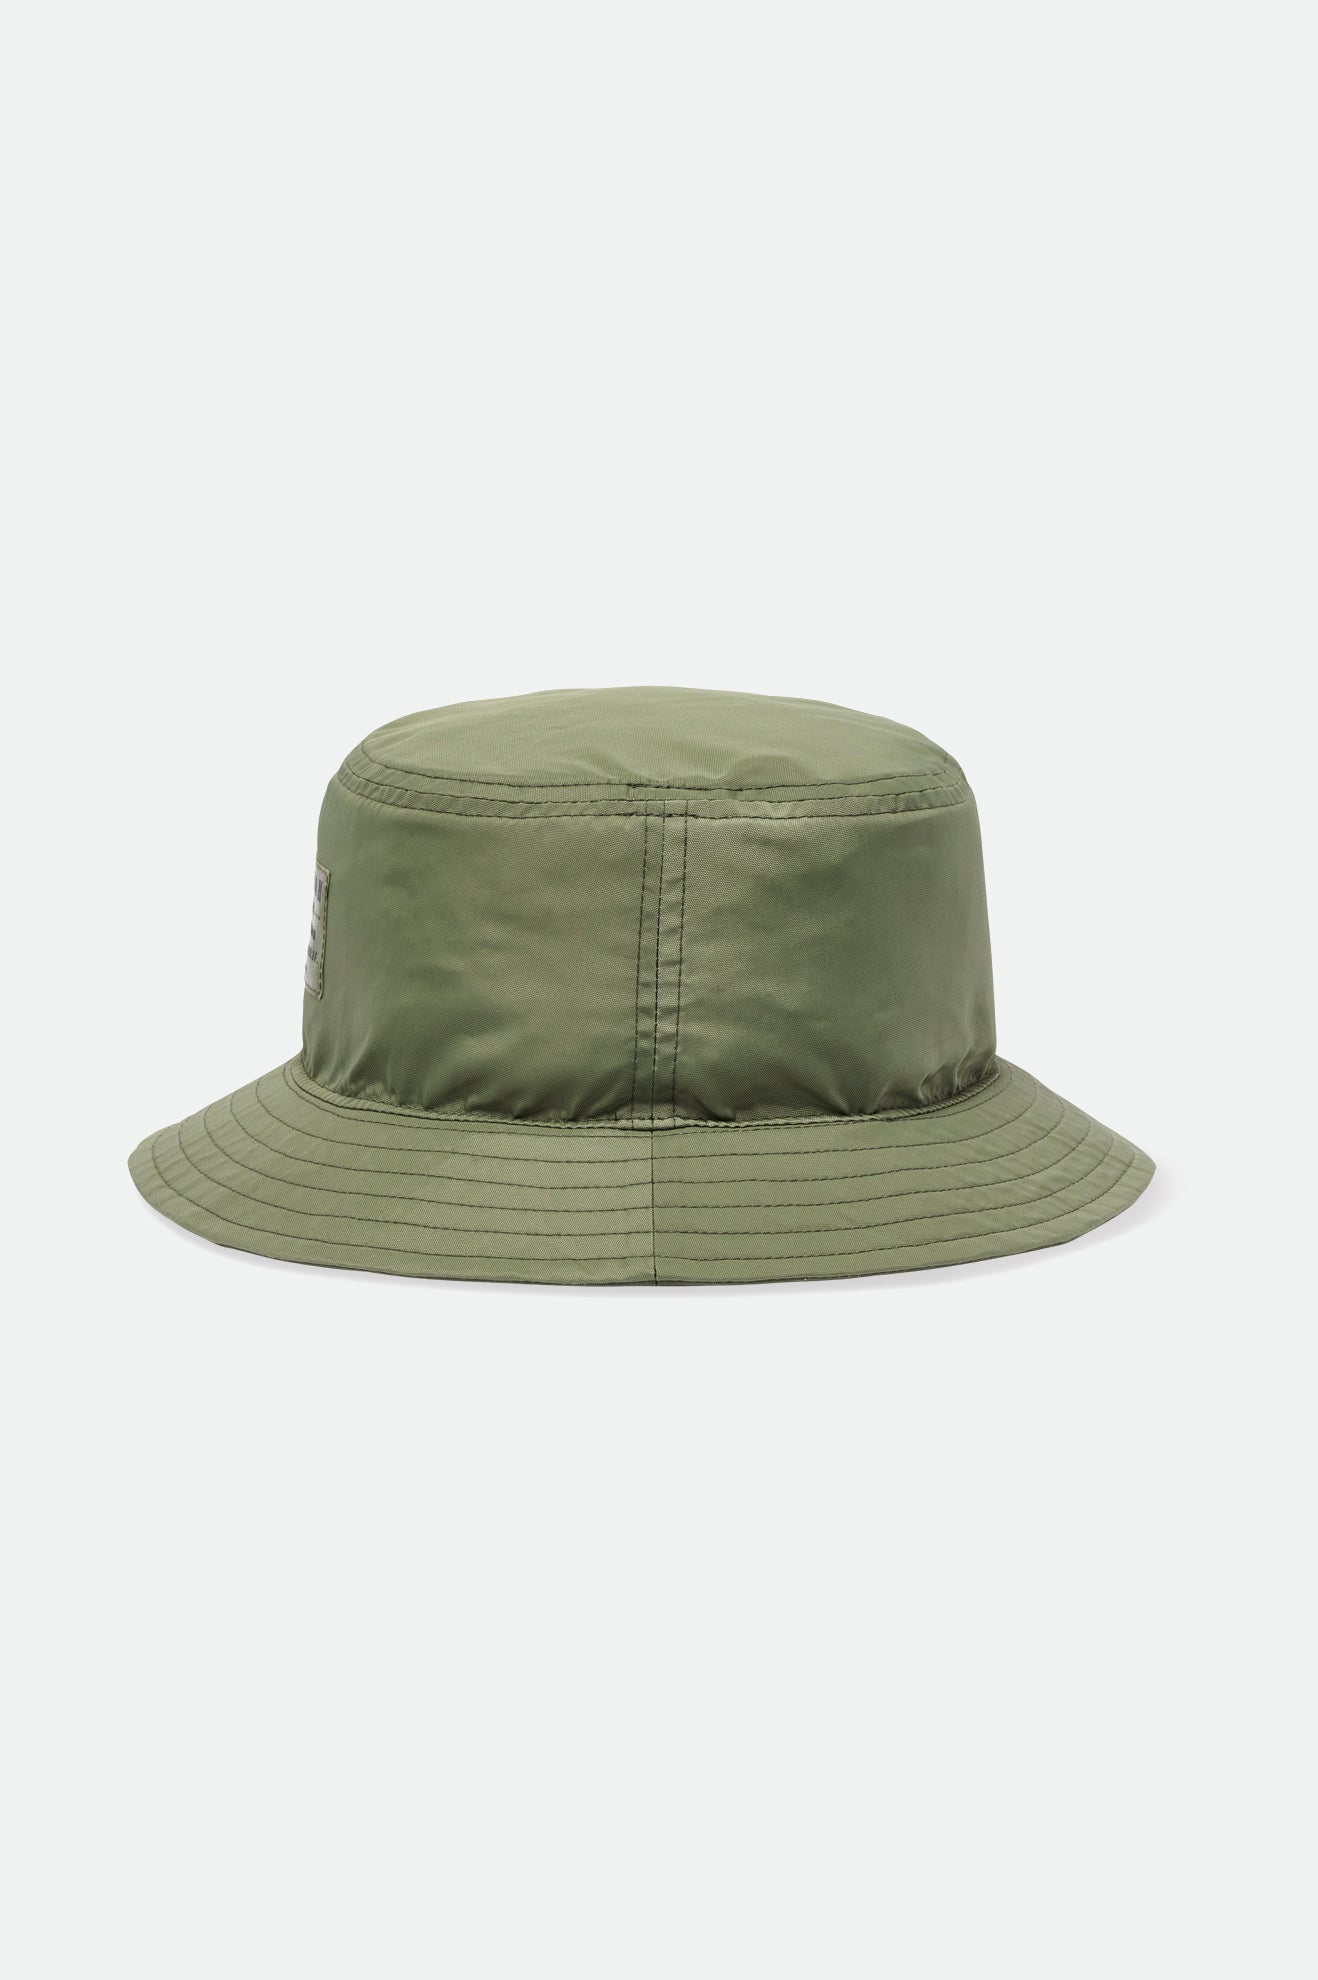 Brixton Vintage Nylon Packable Bucket Hat in Olive